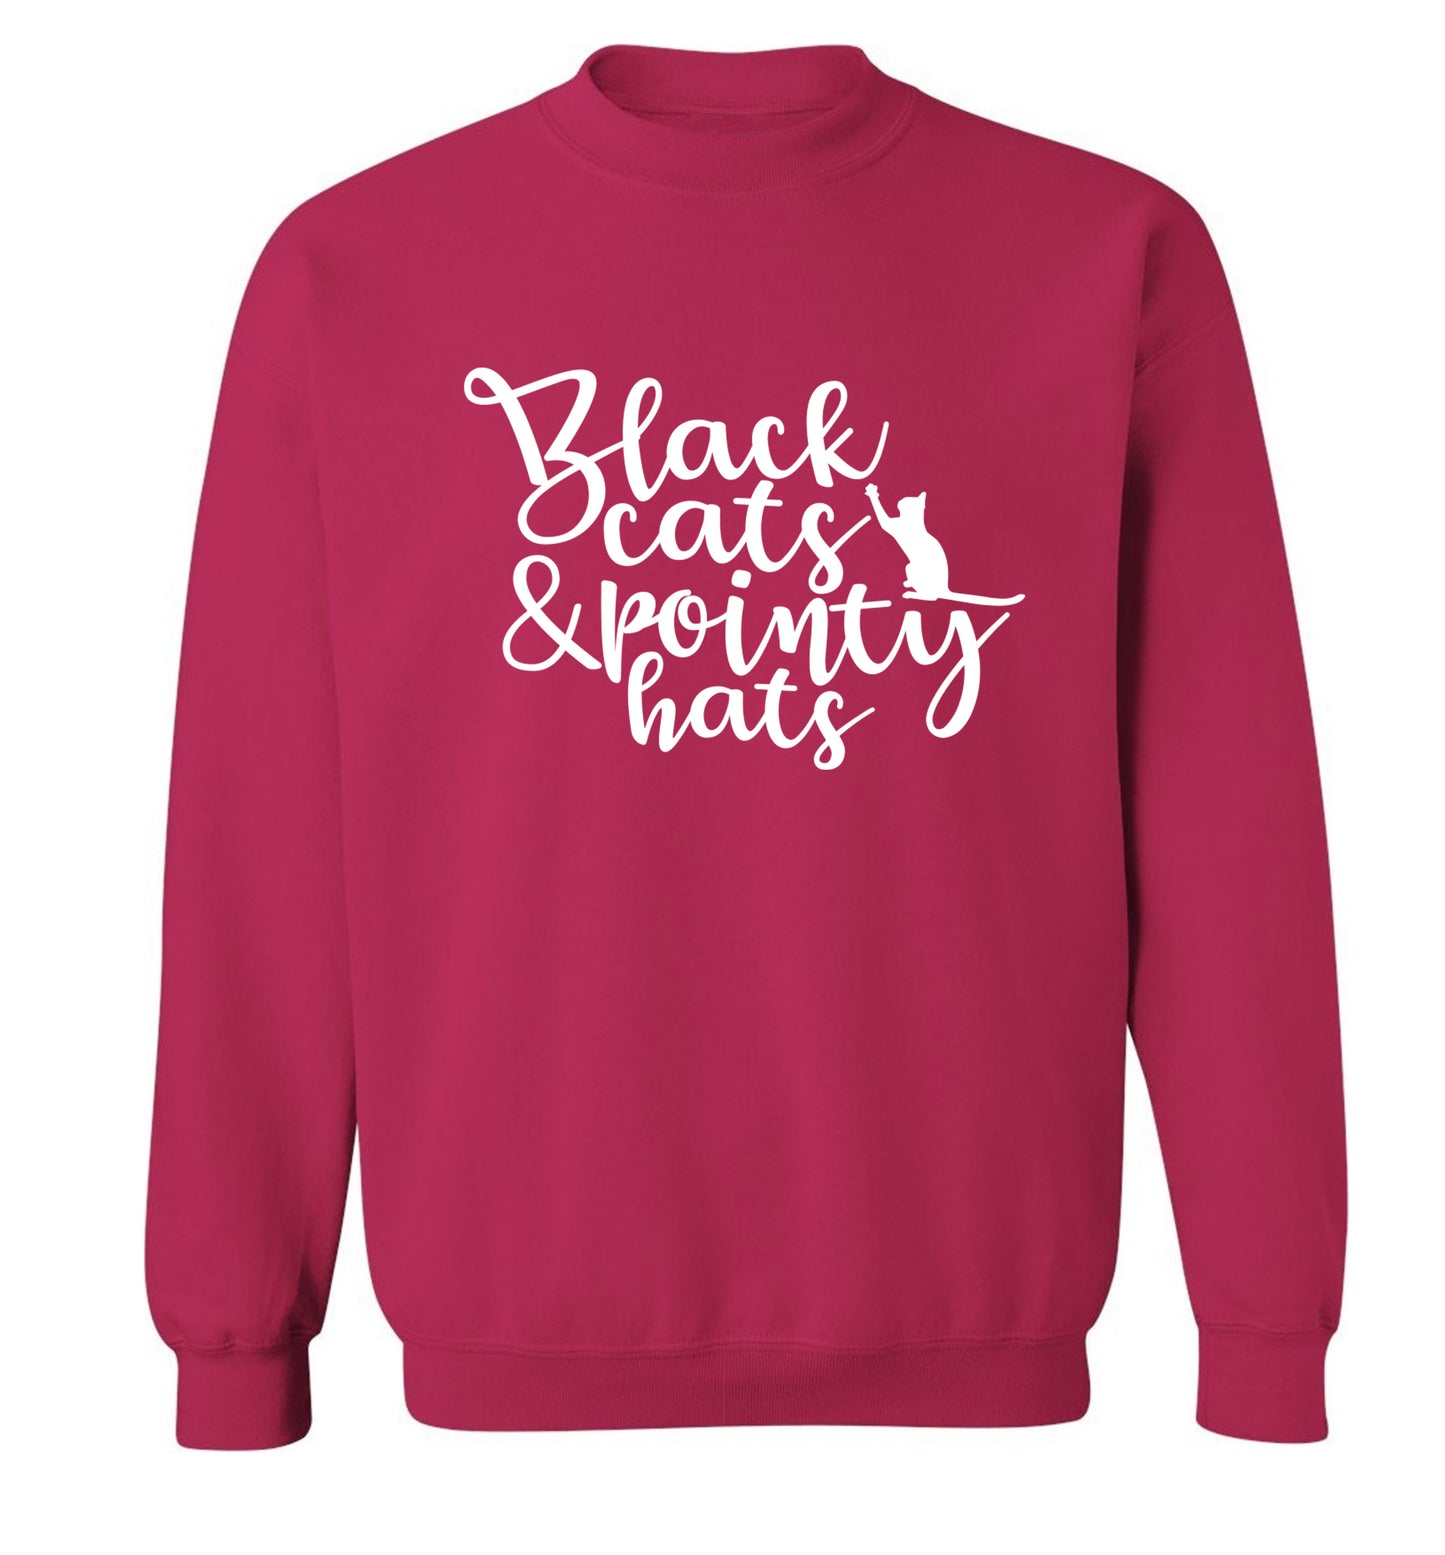 Black cats and pointy hats Adult's unisex pink Sweater 2XL